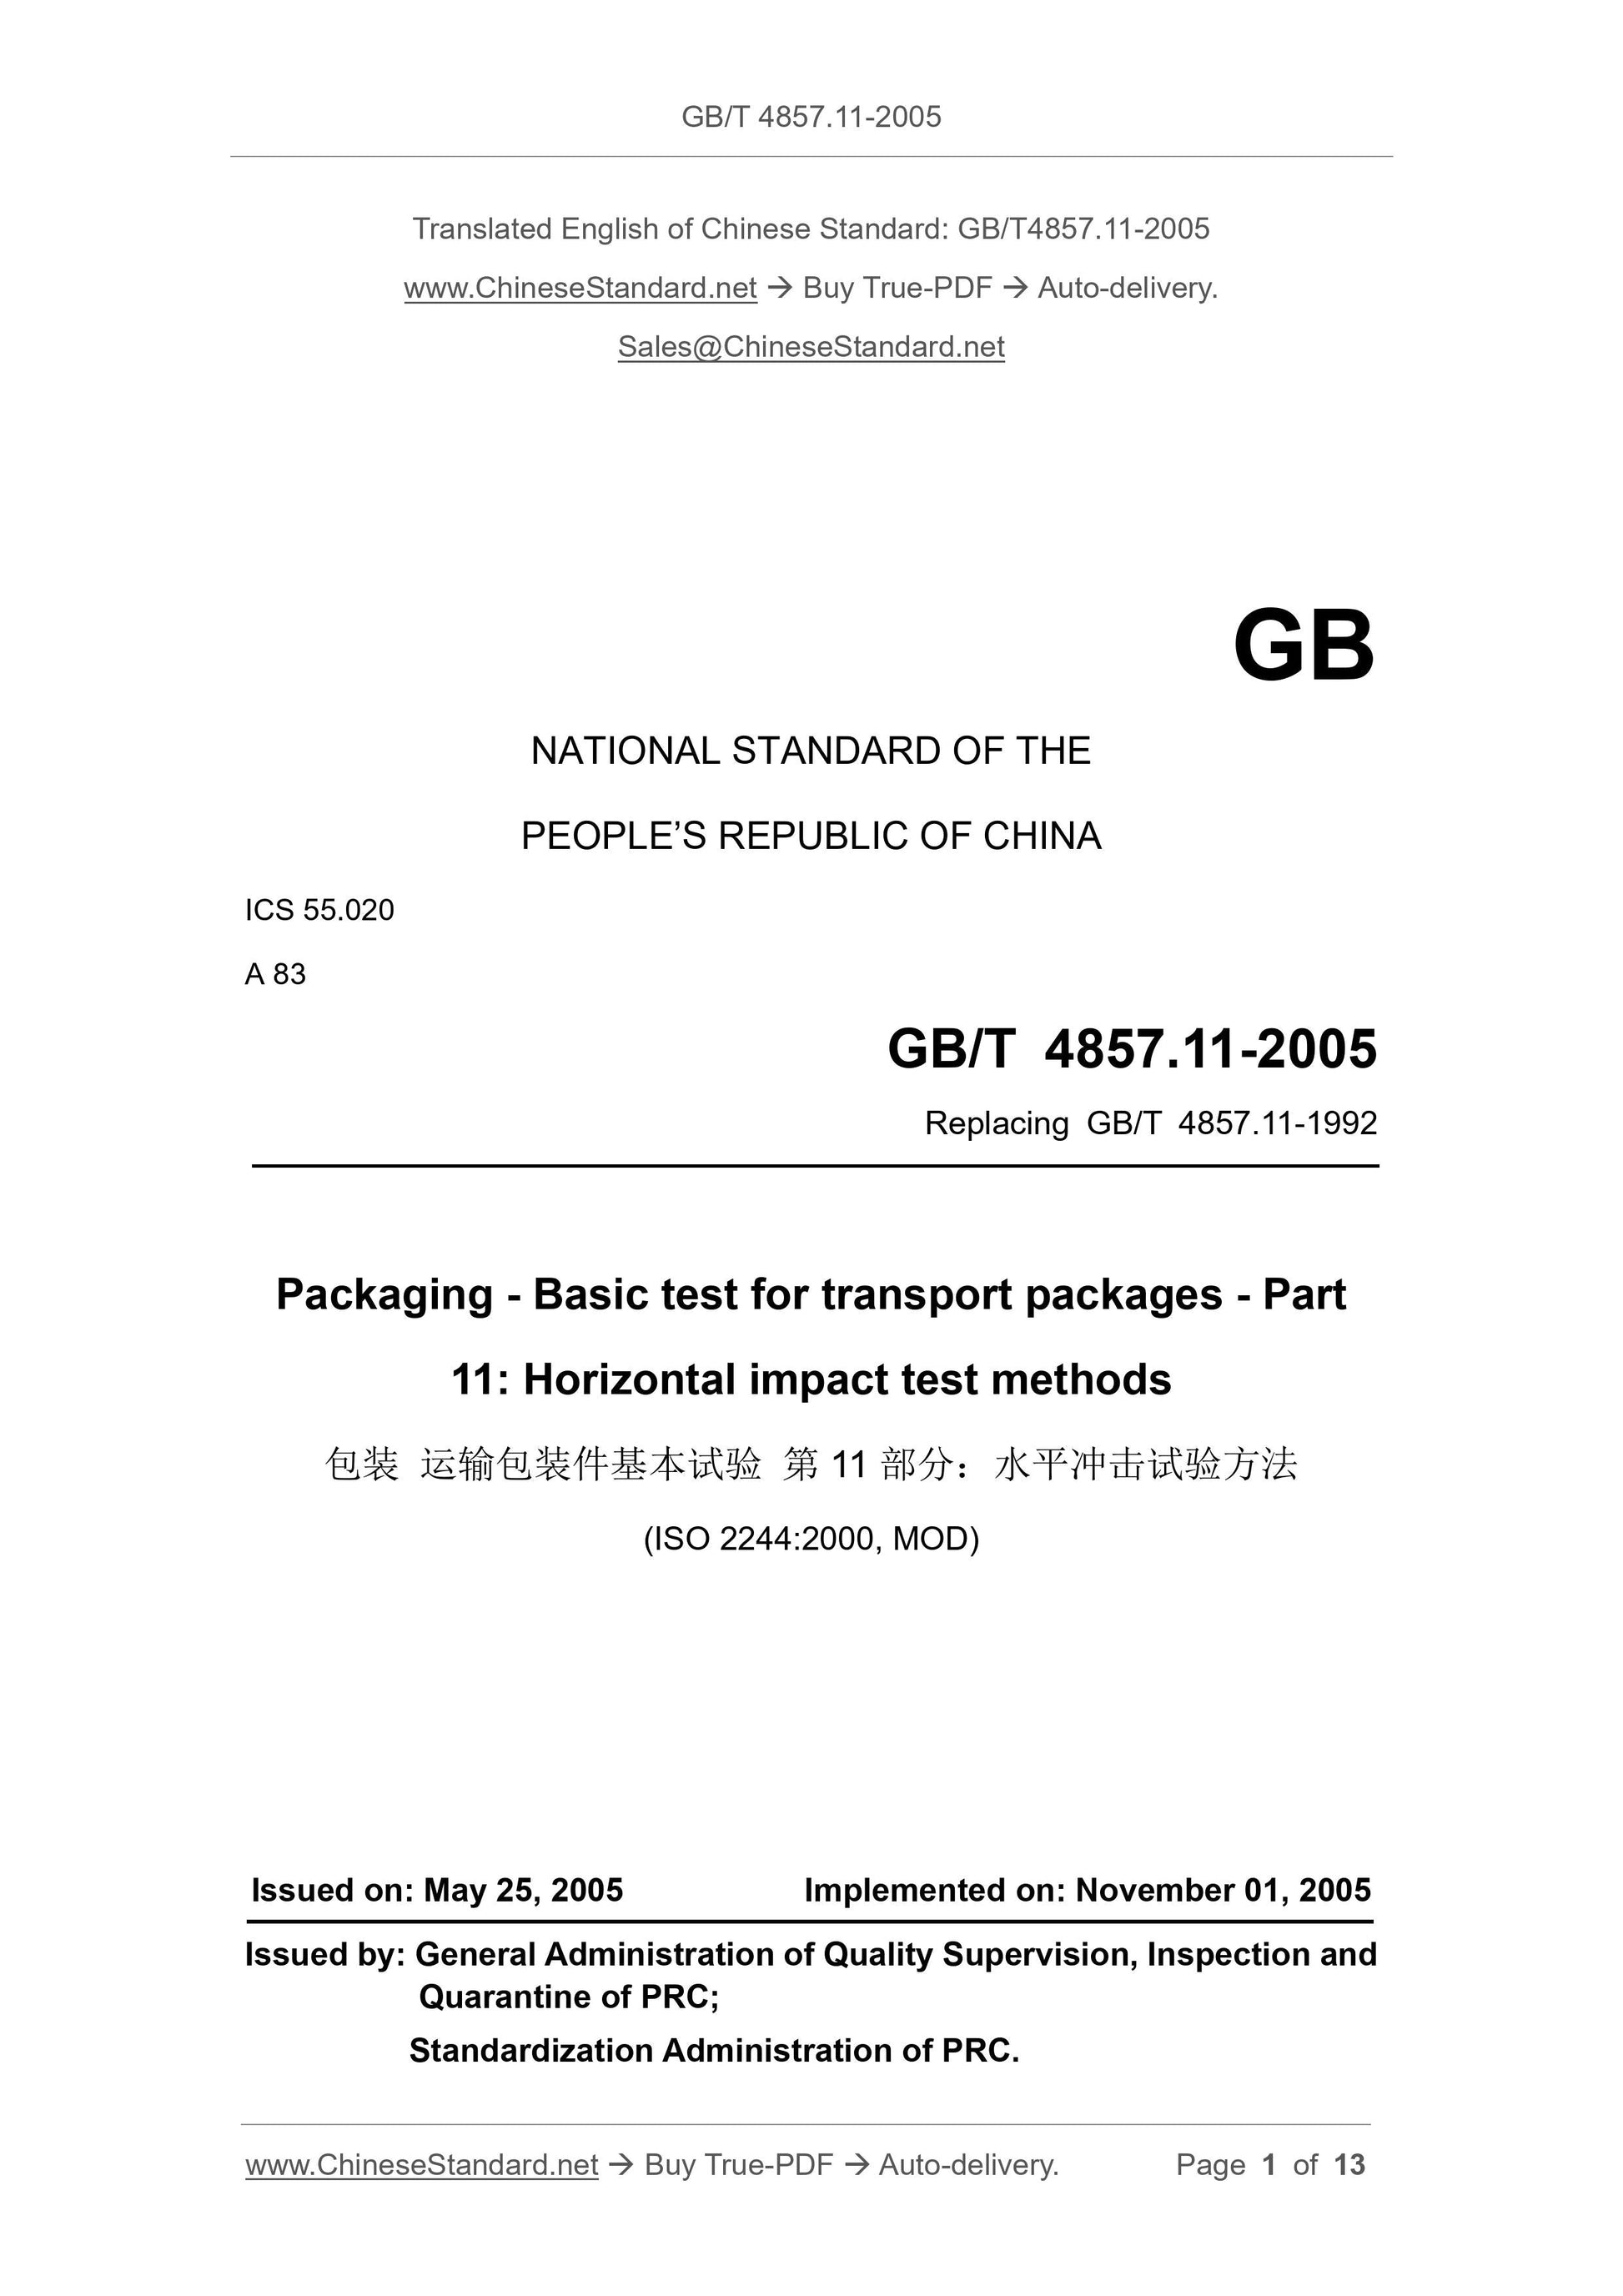 GB/T 4857.11-2005 Page 1